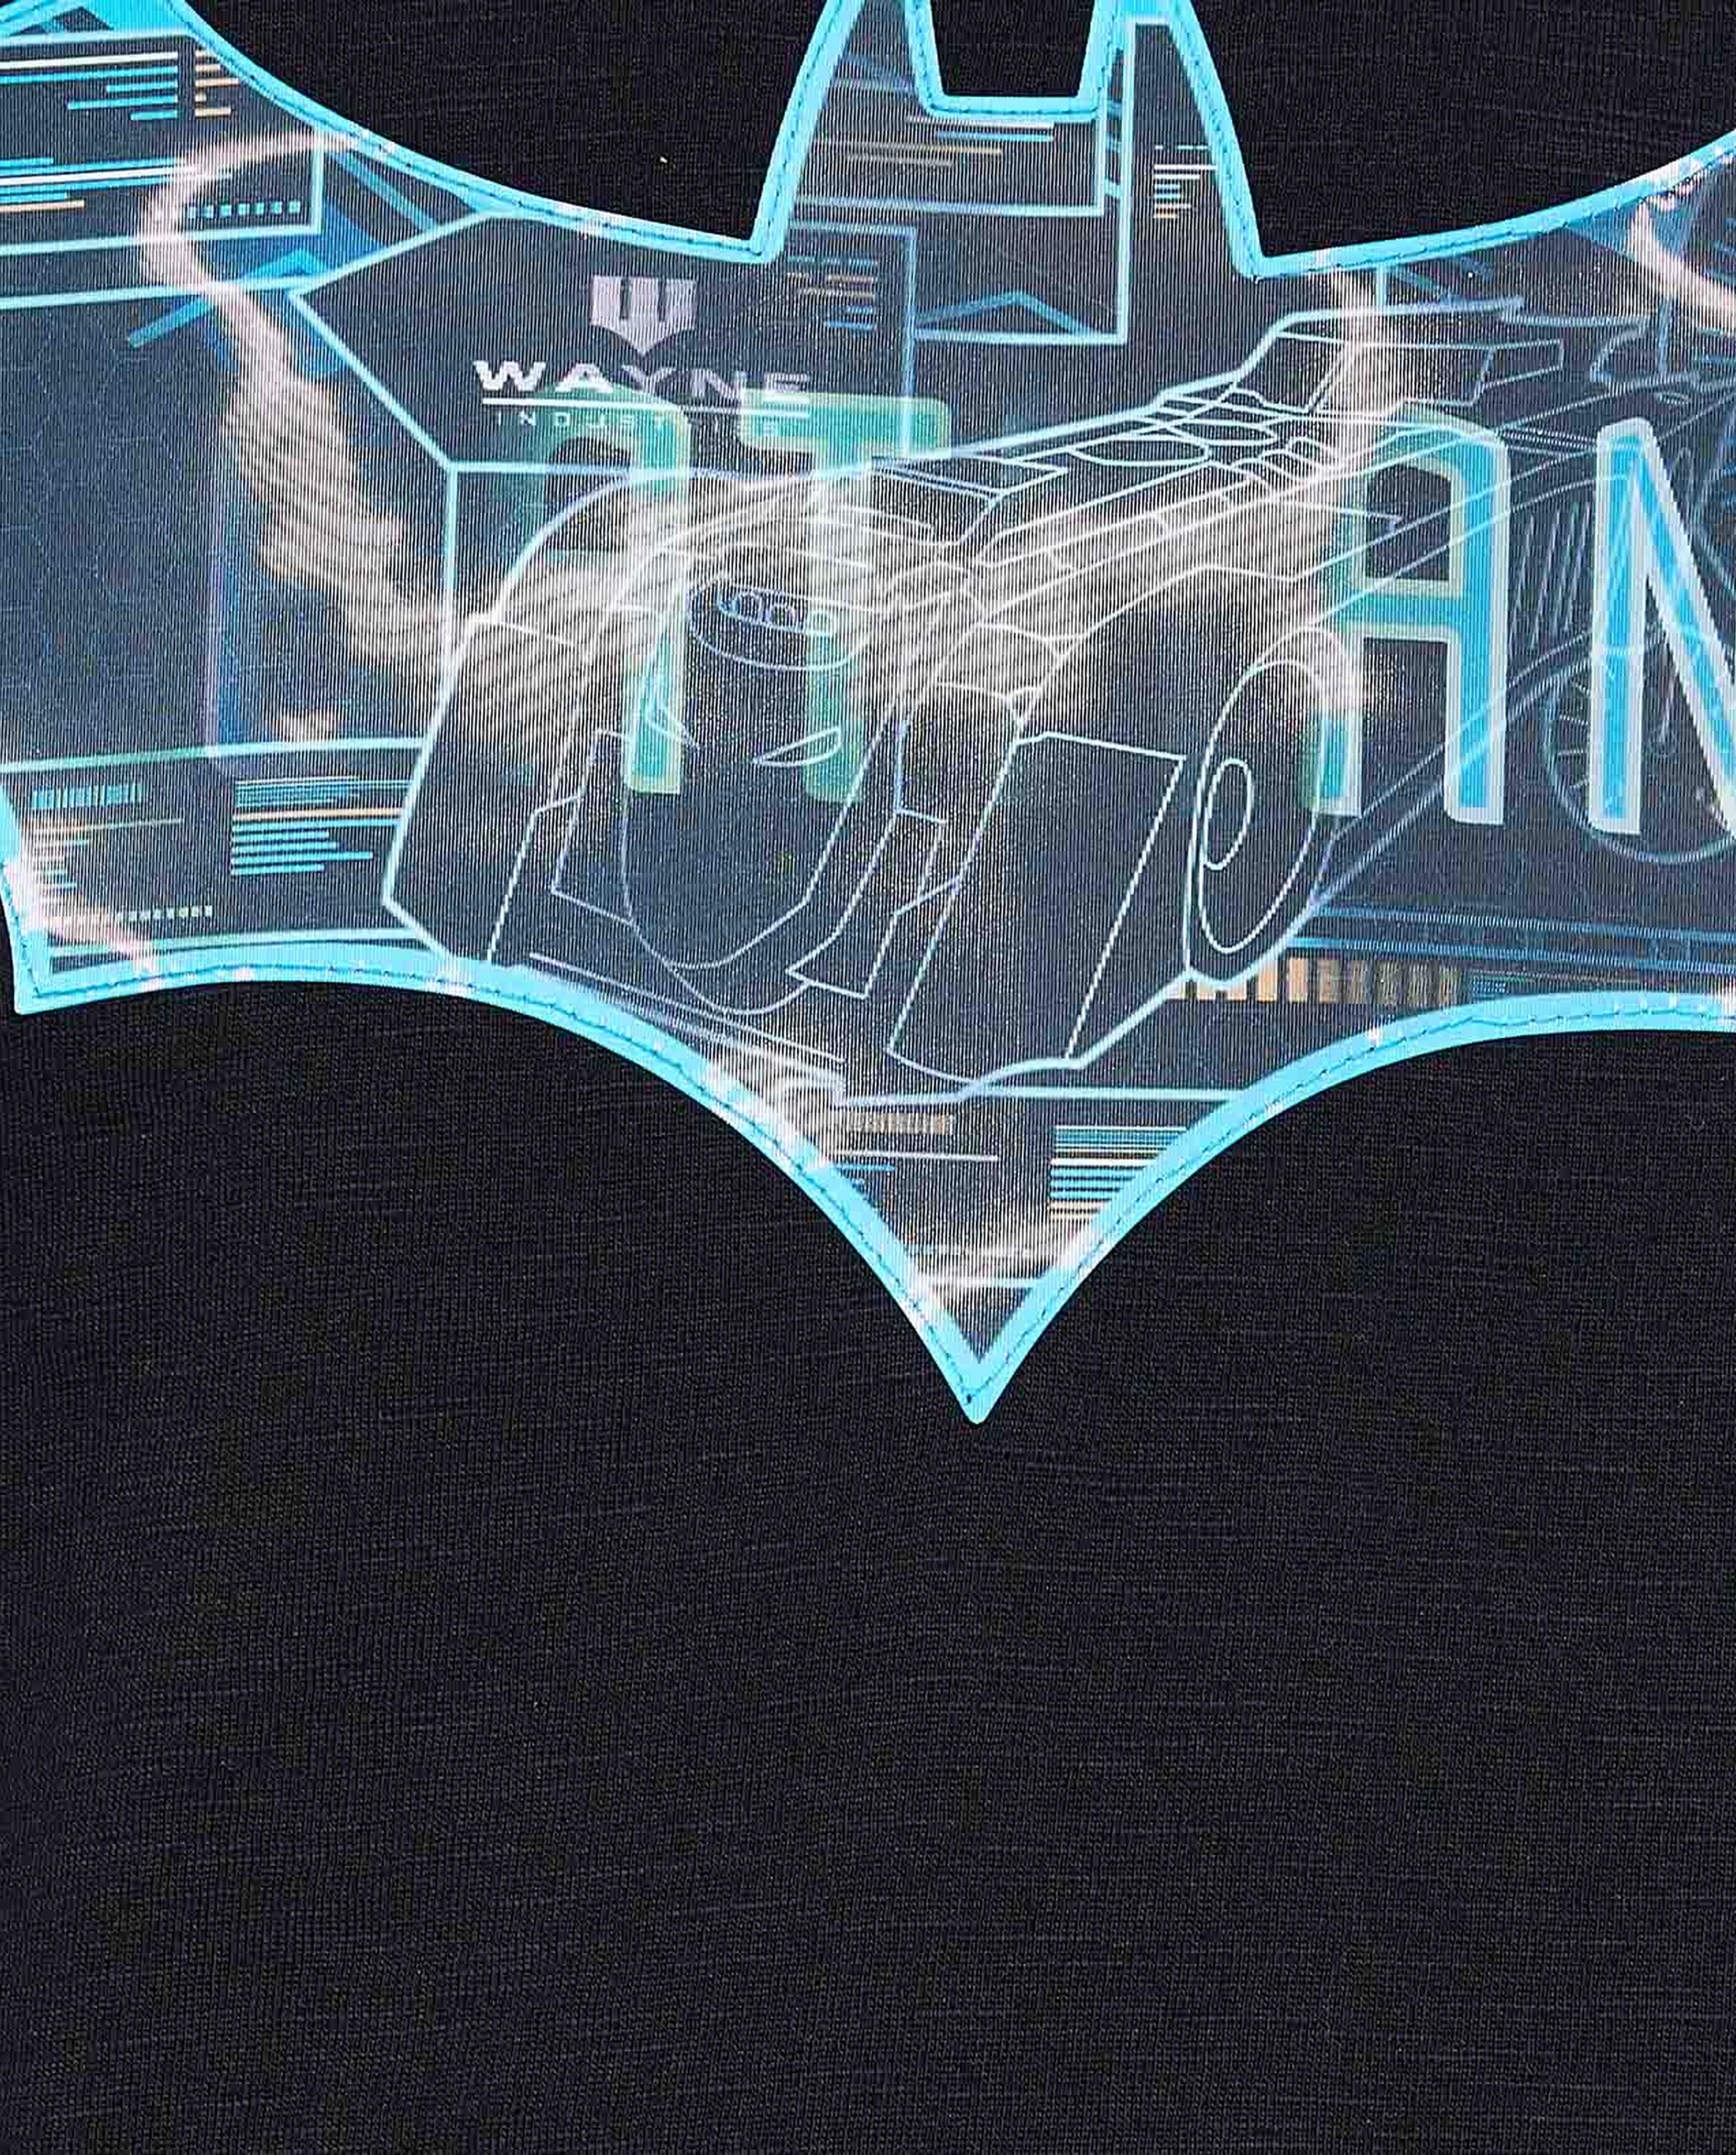 Batman Print T-Shirt with Crew Neck and Short Sleeves